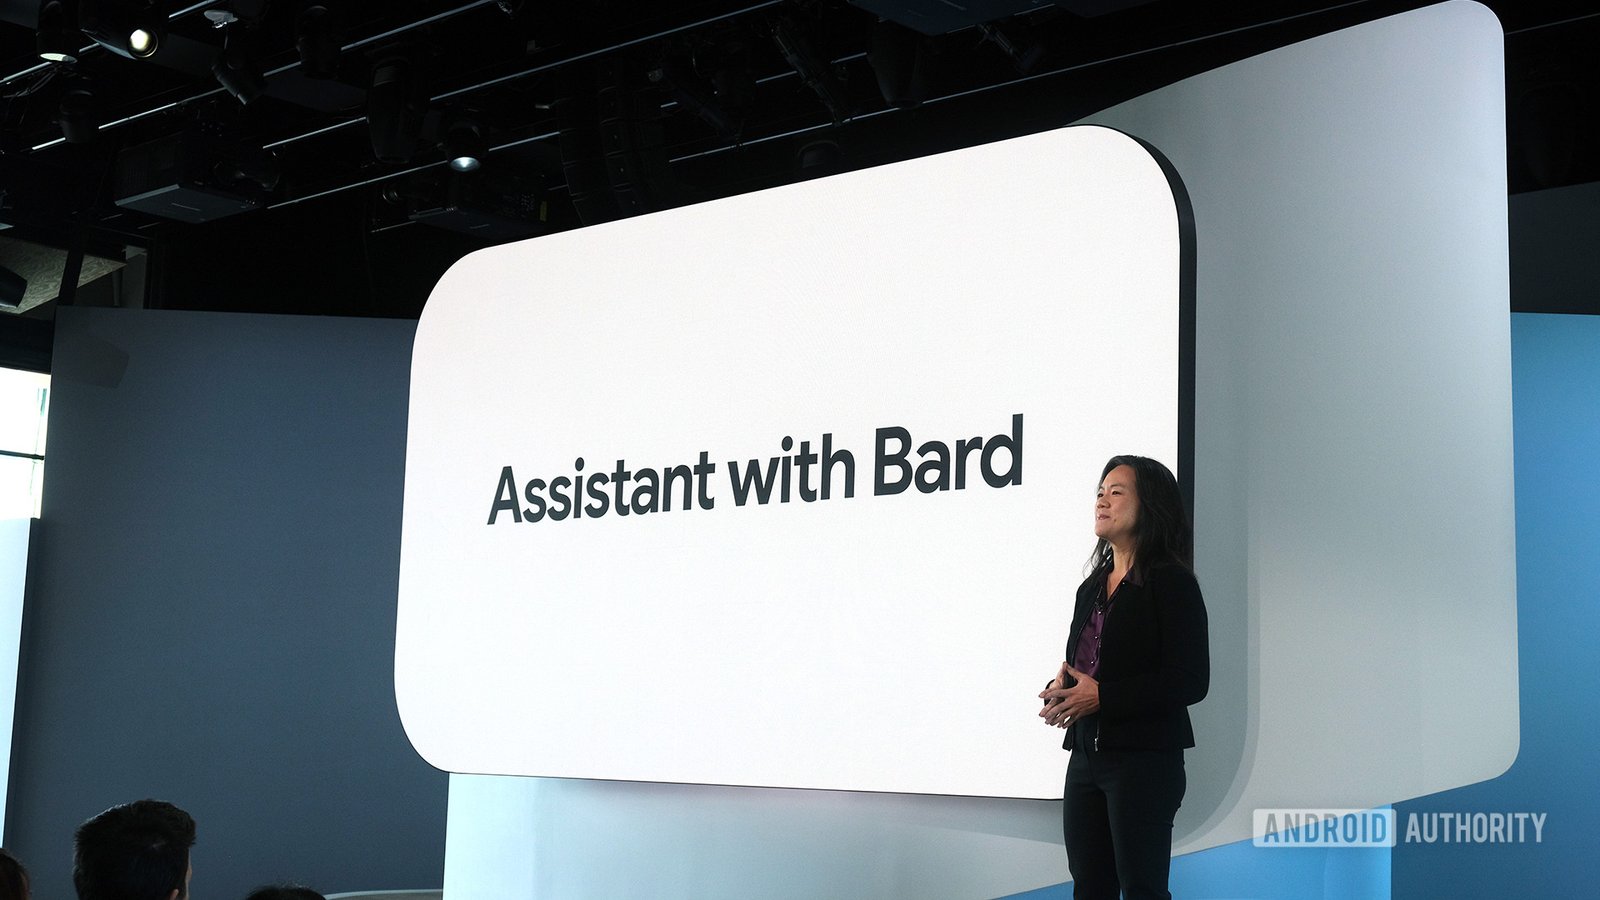 Google is axing the Assistant with Bard branding now that Gemini is here